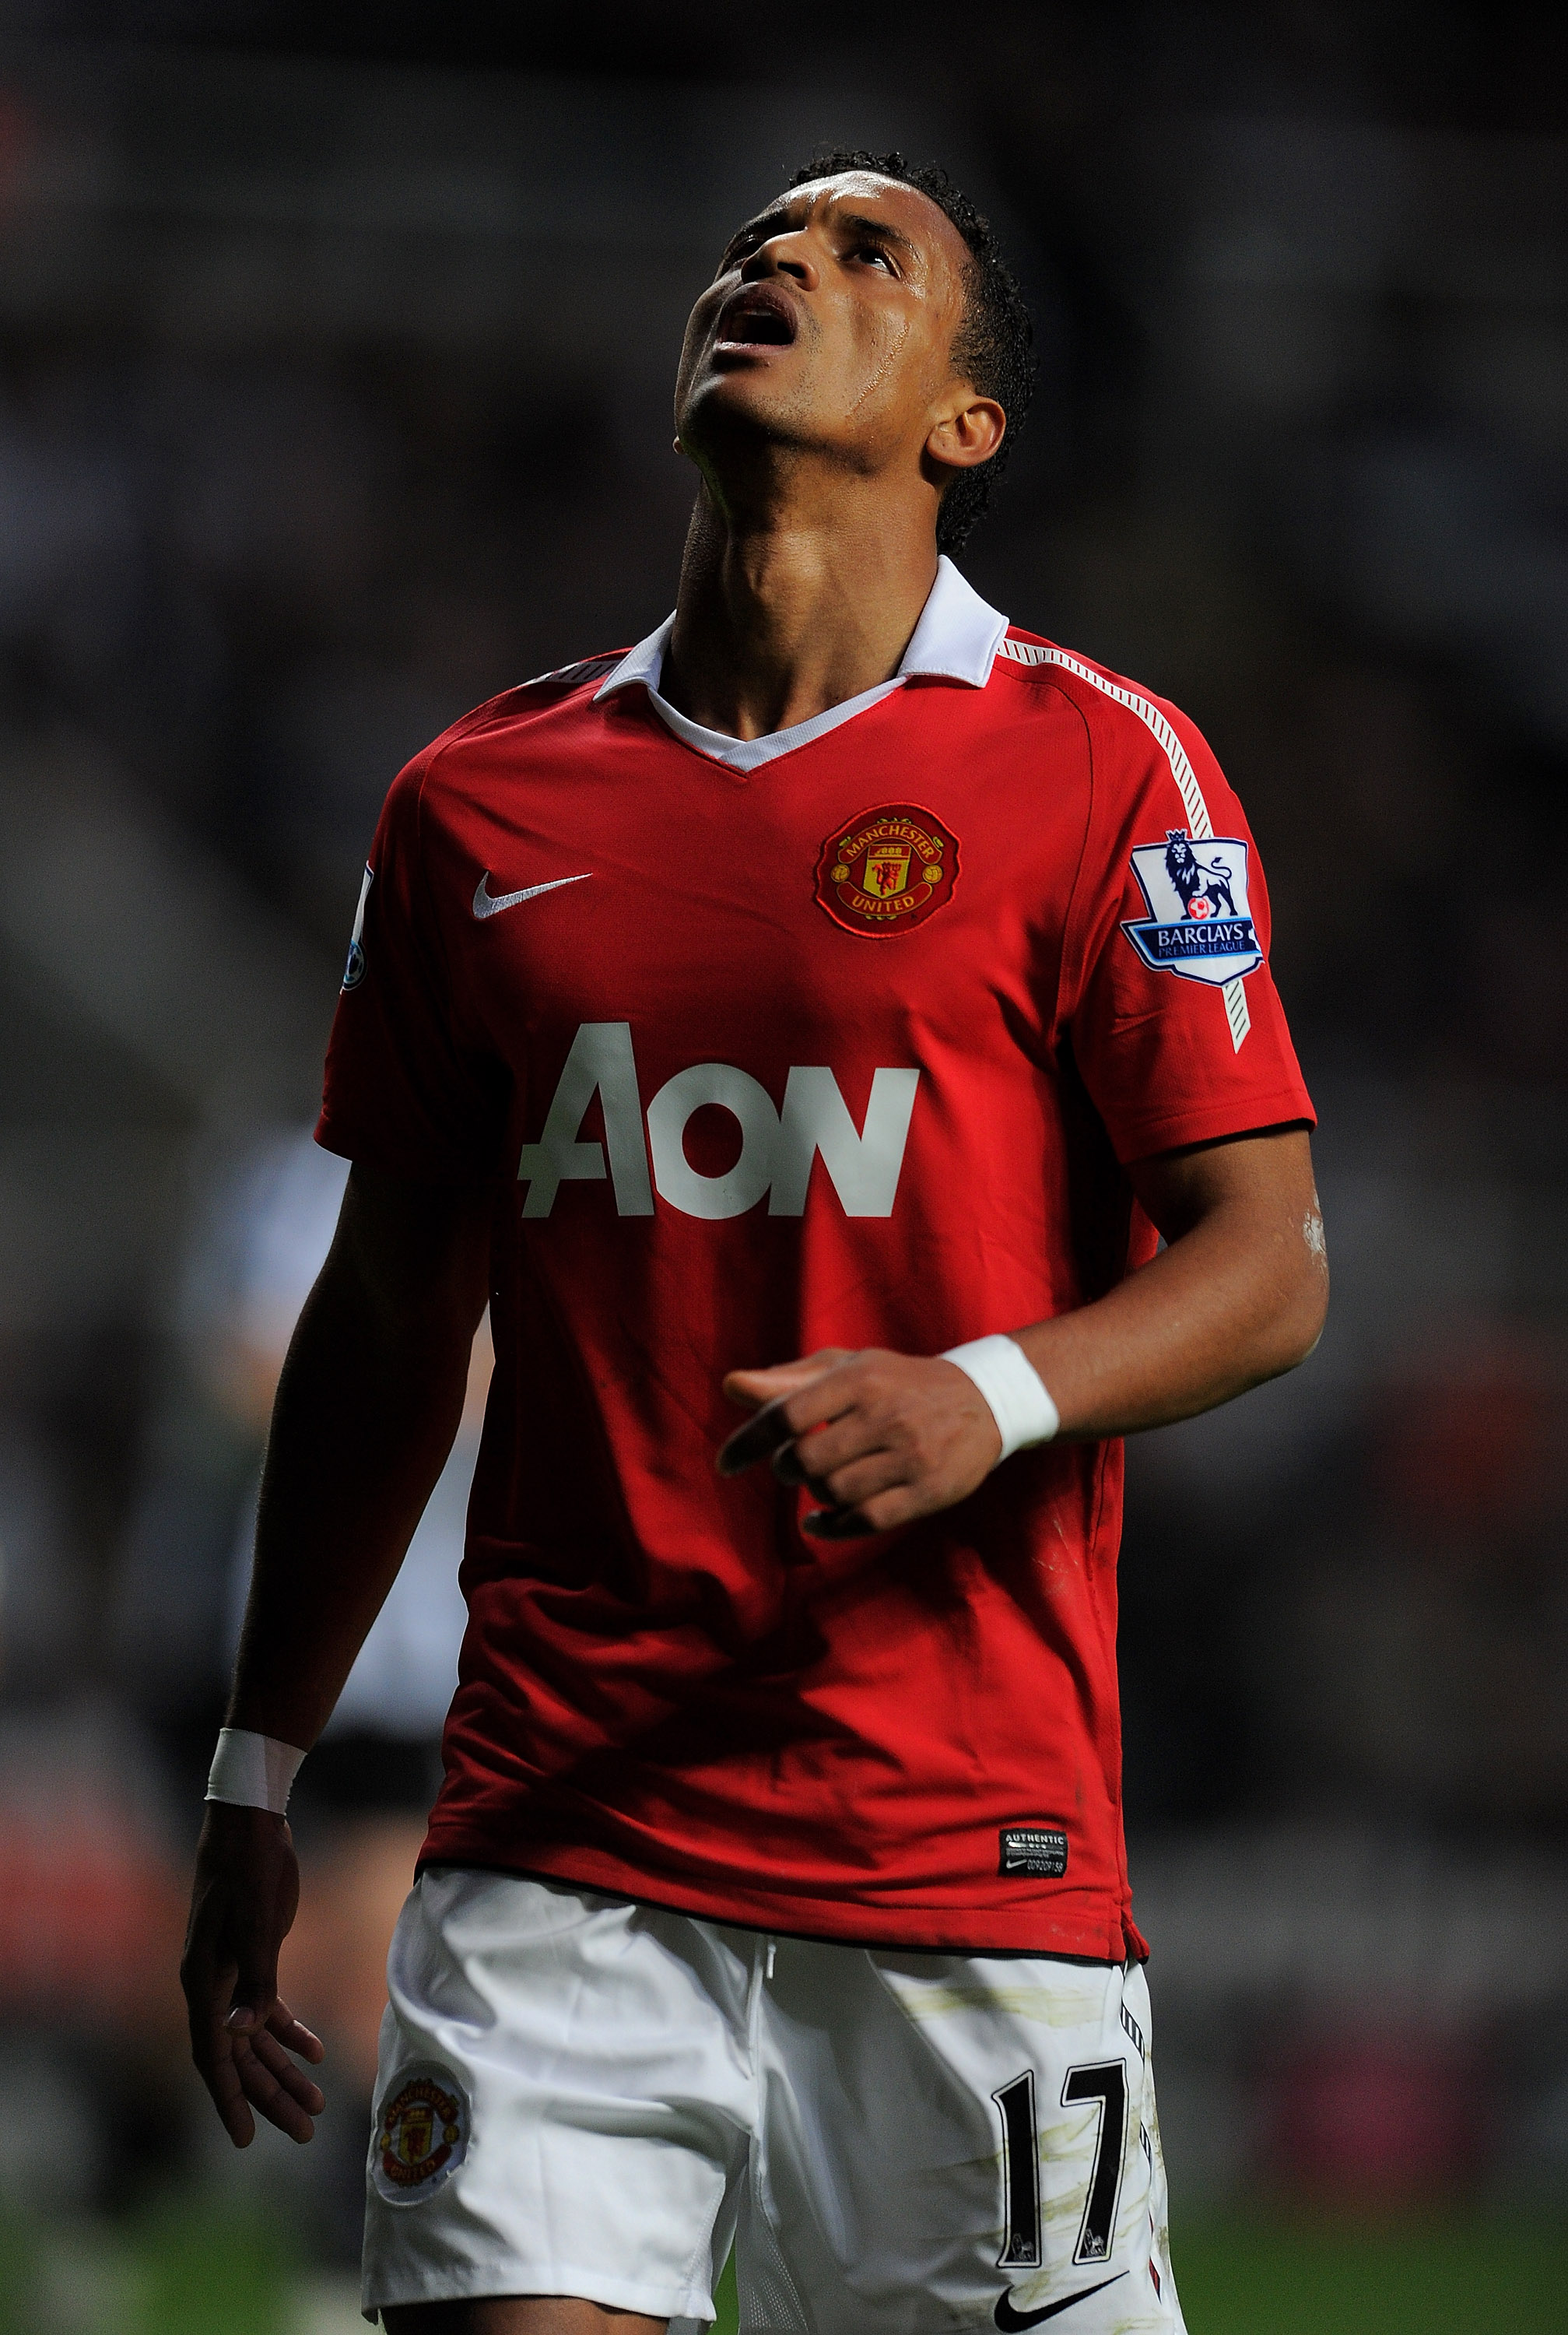 NEWCASTLE UPON TYNE, ENGLAND - APRIL 19: Nani of Manchester United reacts during the Barclays Premier League match between Newcastle United and Manchester United at St James' Park on April 19, 2011 in Newcastle, England.  (Photo by Michael Regan/Getty Ima